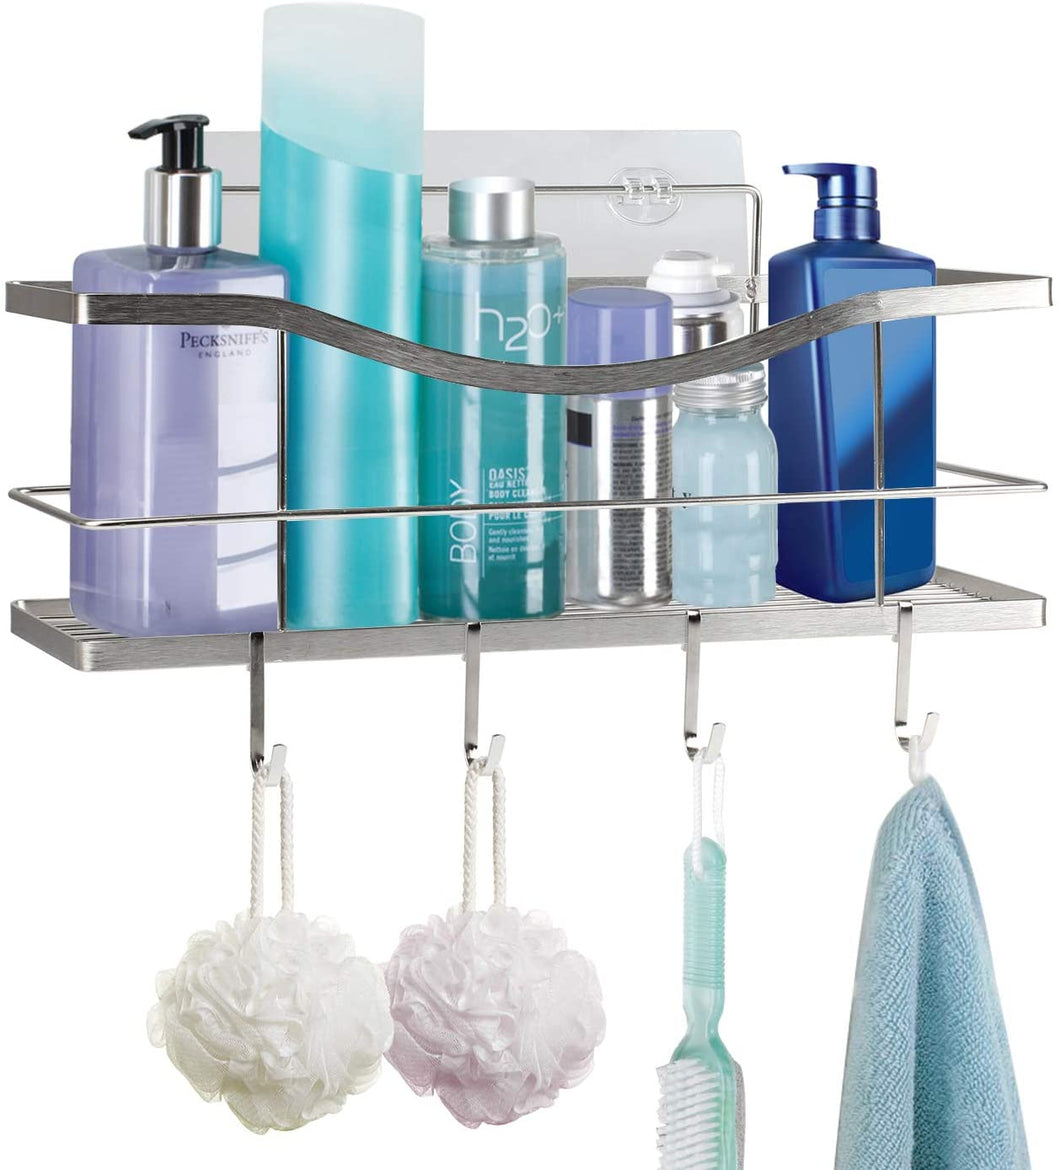 Suction Shower Caddy With 4 Hooks, Bathroom Shower Basket Wall Mounted  White